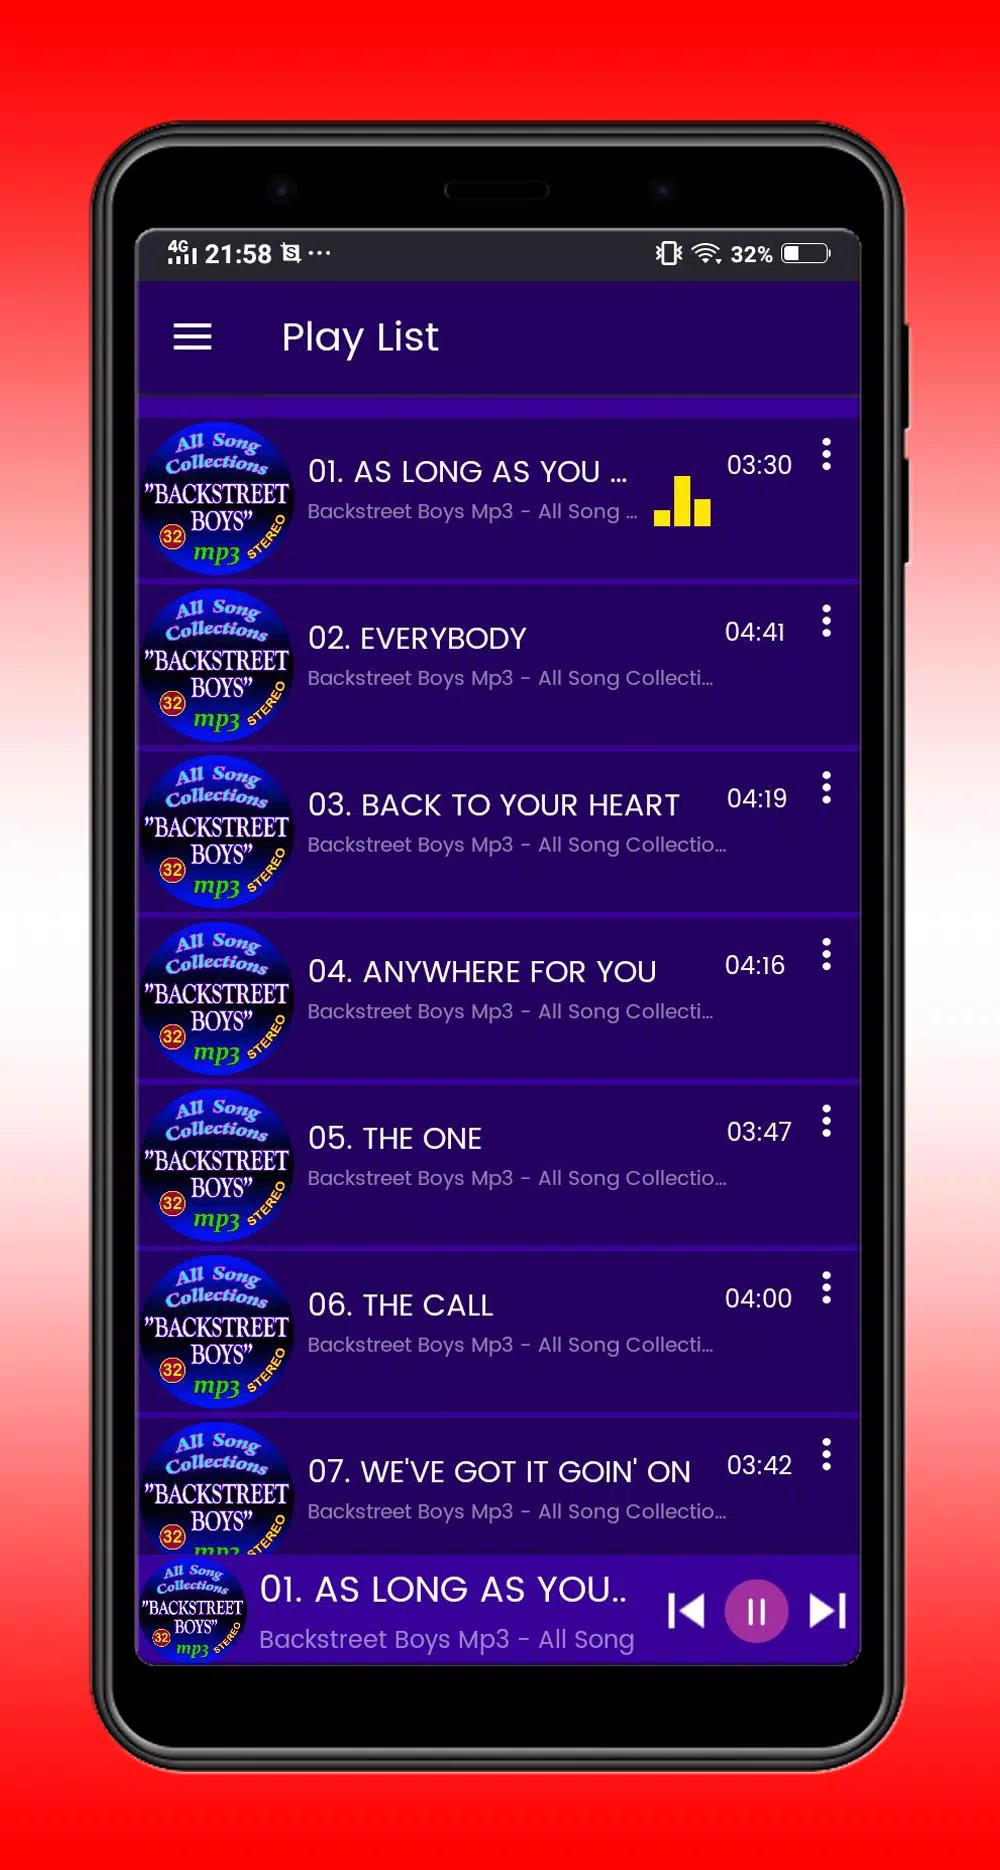 Backstreet Boys Mp3 - All Song Collections APK for Android Download